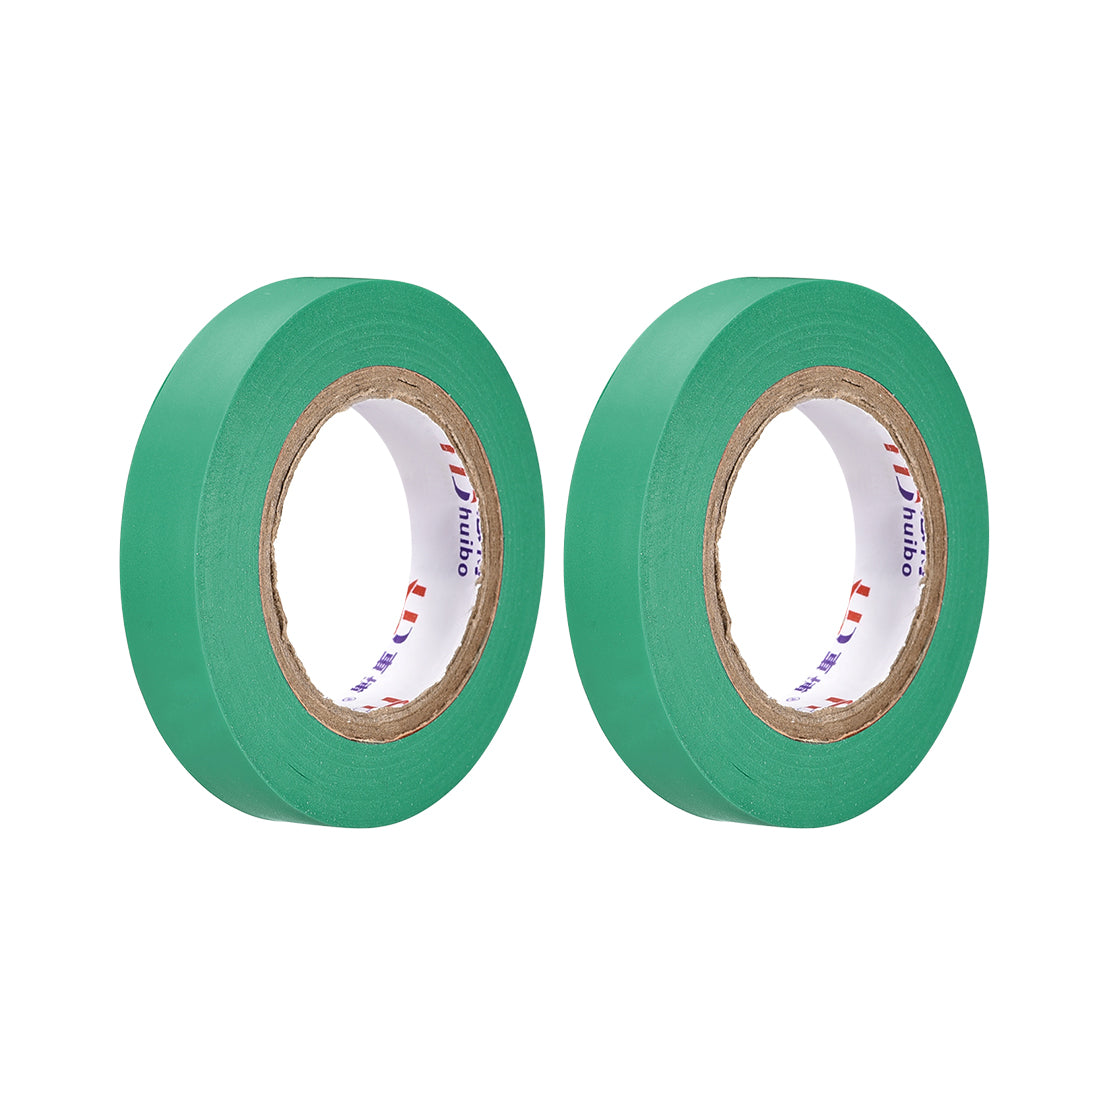 uxcell Uxcell Insulating Tape 12mm Width 14.5M Long 0.15mm Thick PVC Electrical Tape Rated for Max. 400V  80C Use Green 2pcs